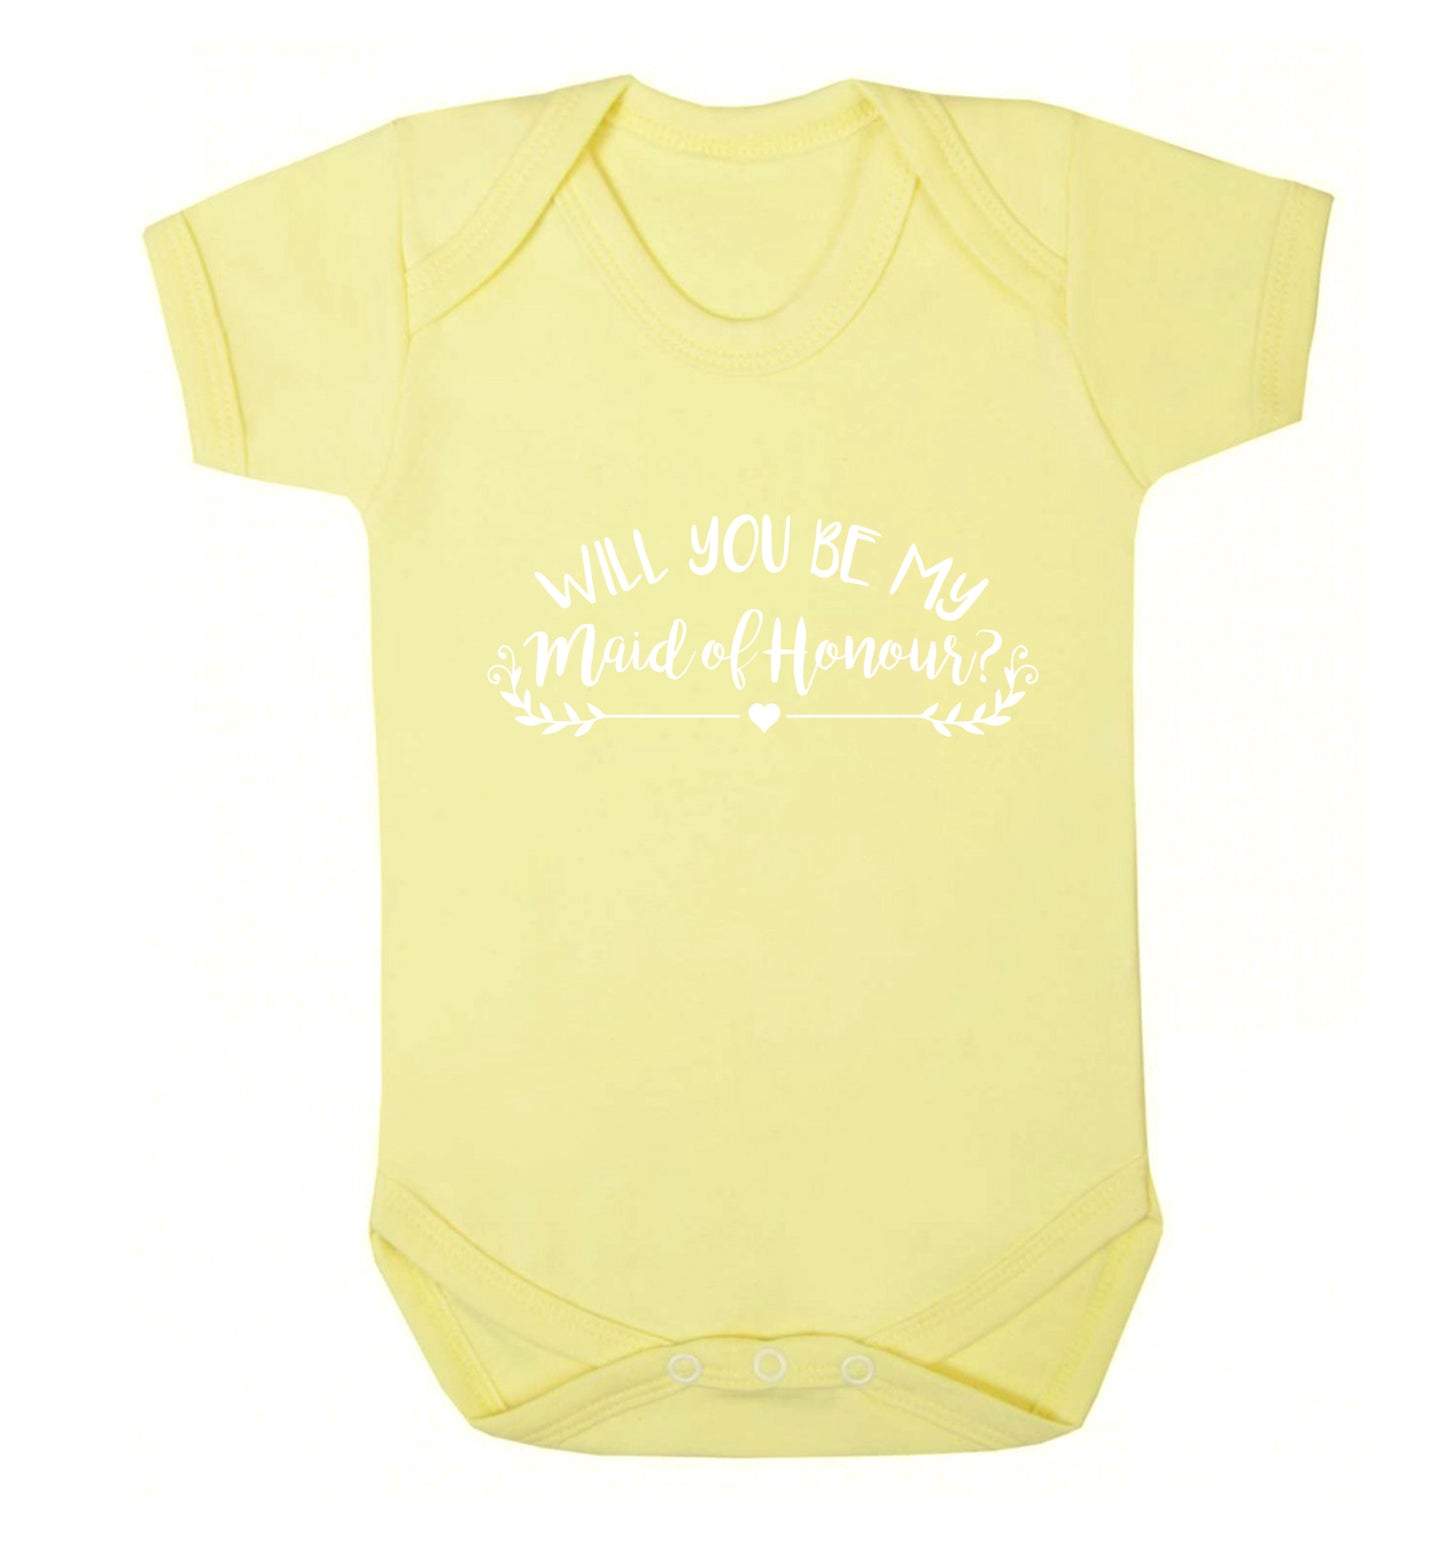 Will you be my maid of honour? Baby Vest pale yellow 18-24 months